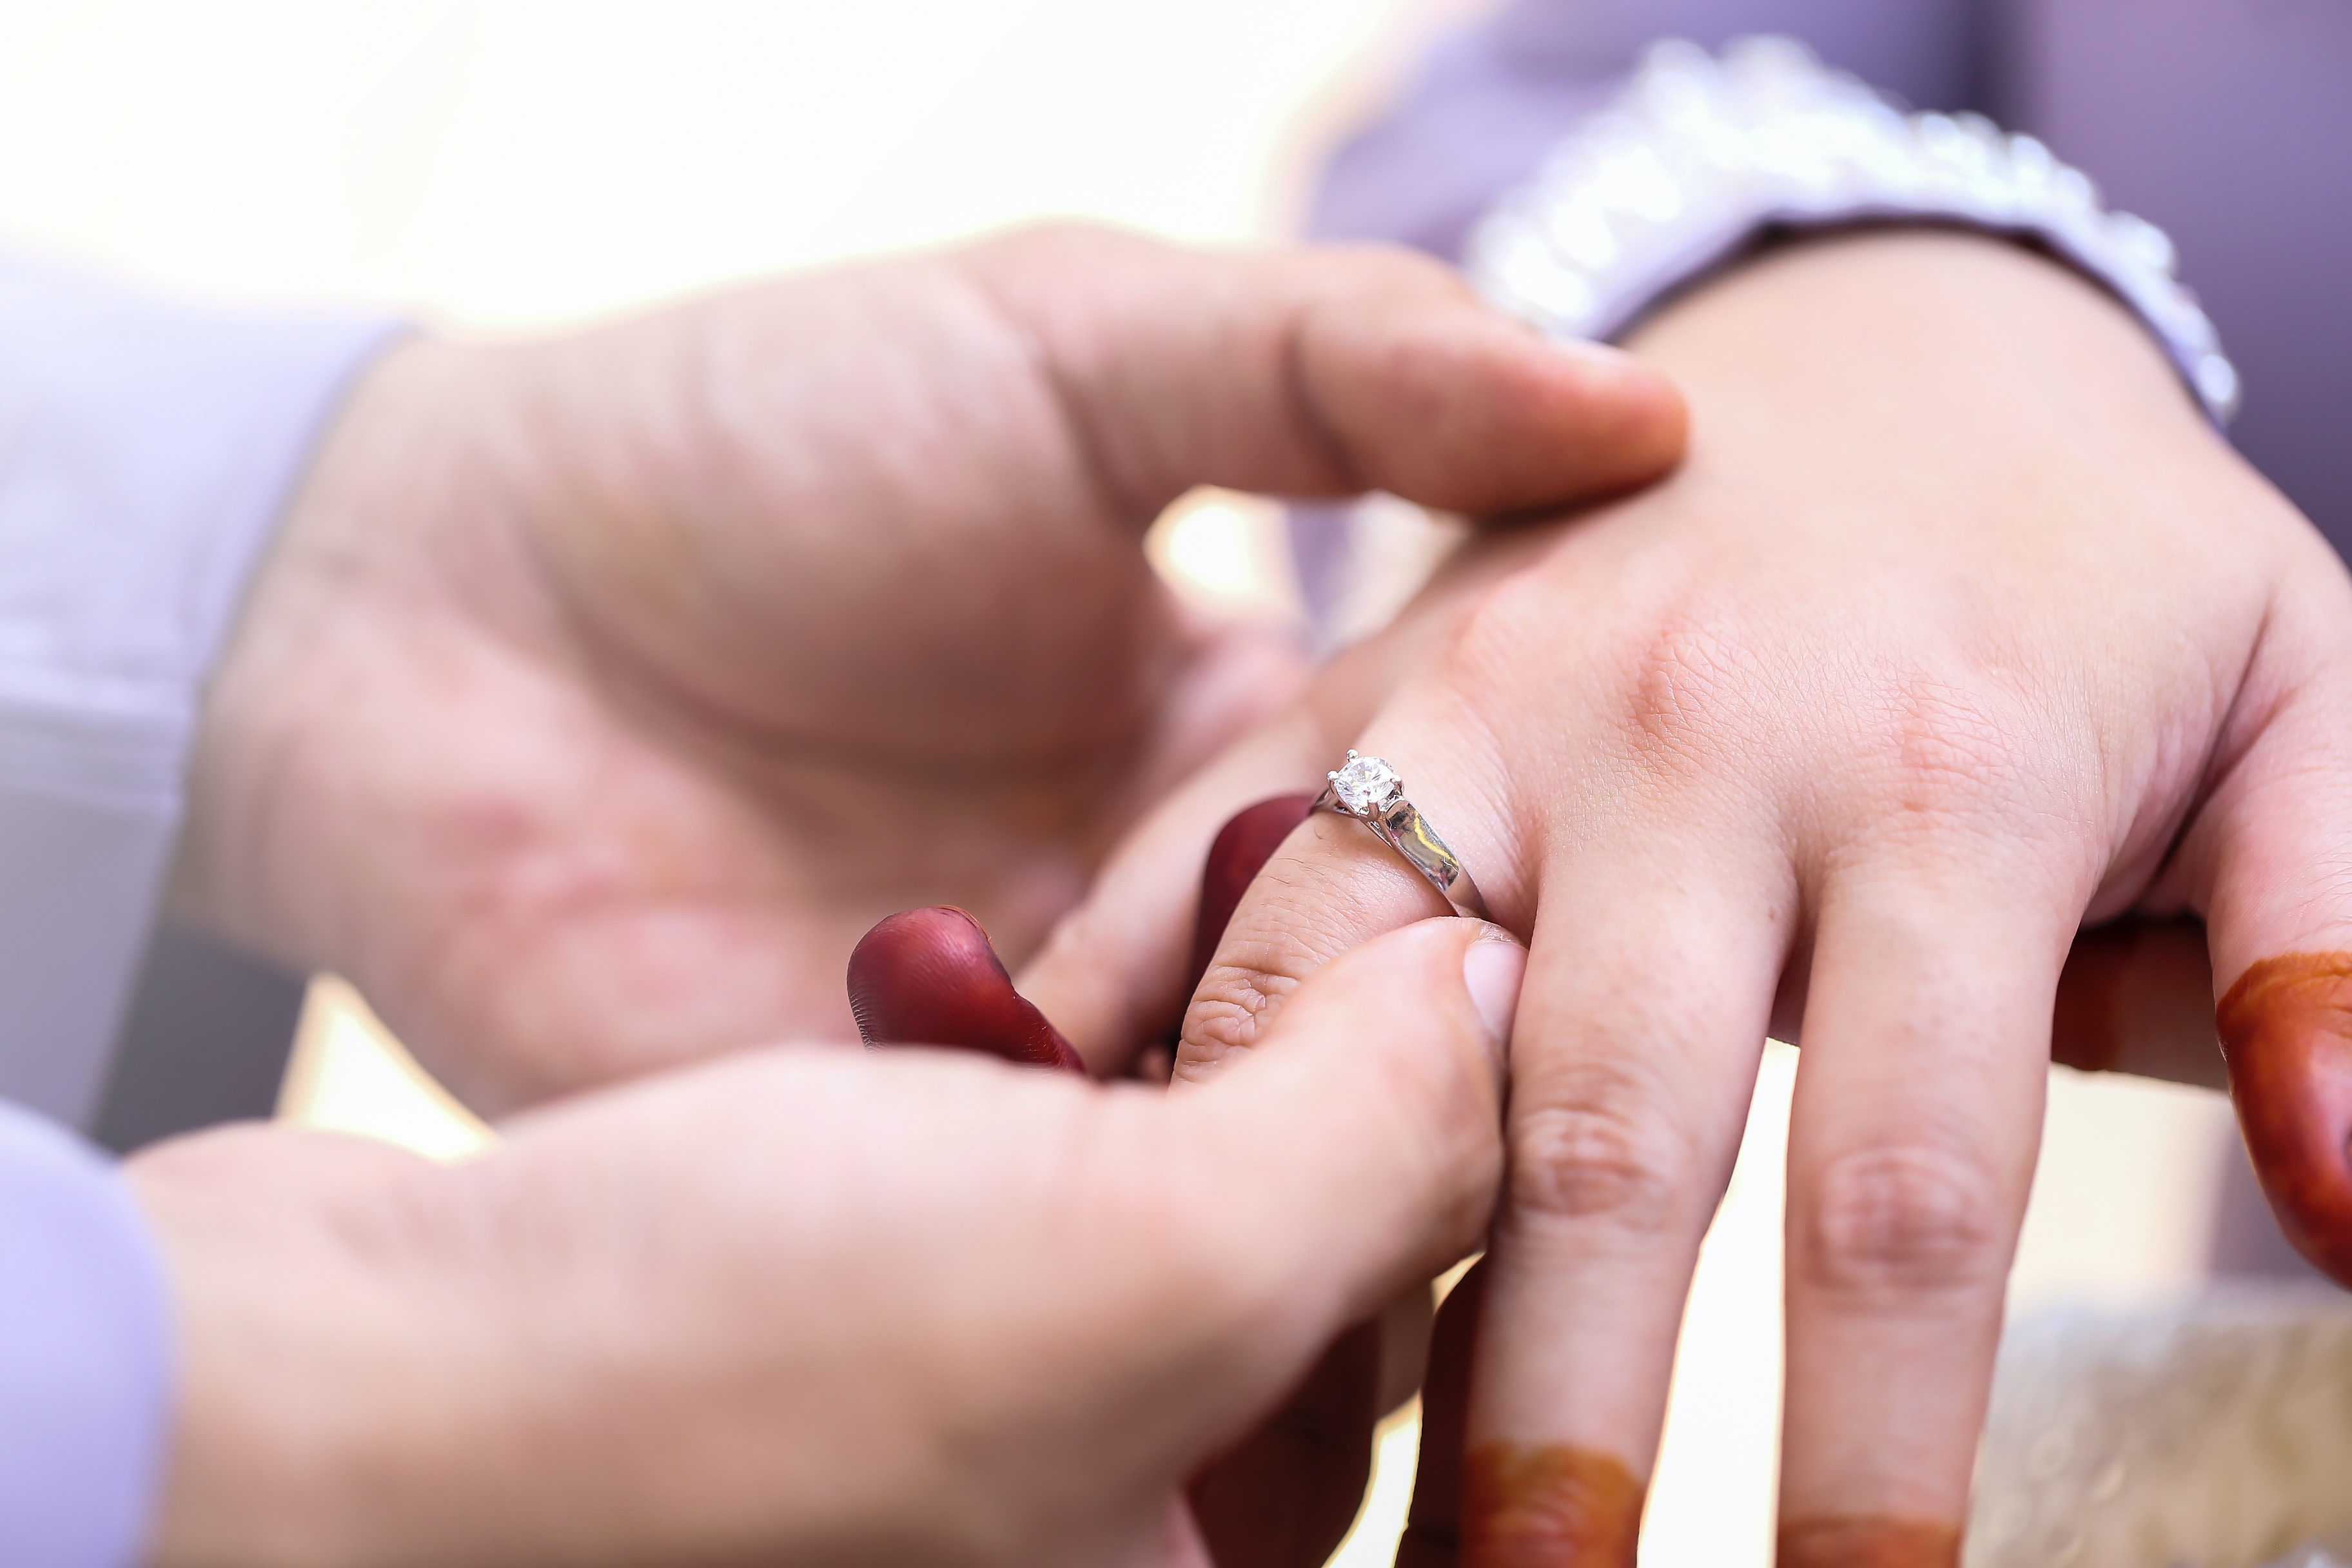 One individual placing a wedding ring on another individual's finger. | Source: Unsplash